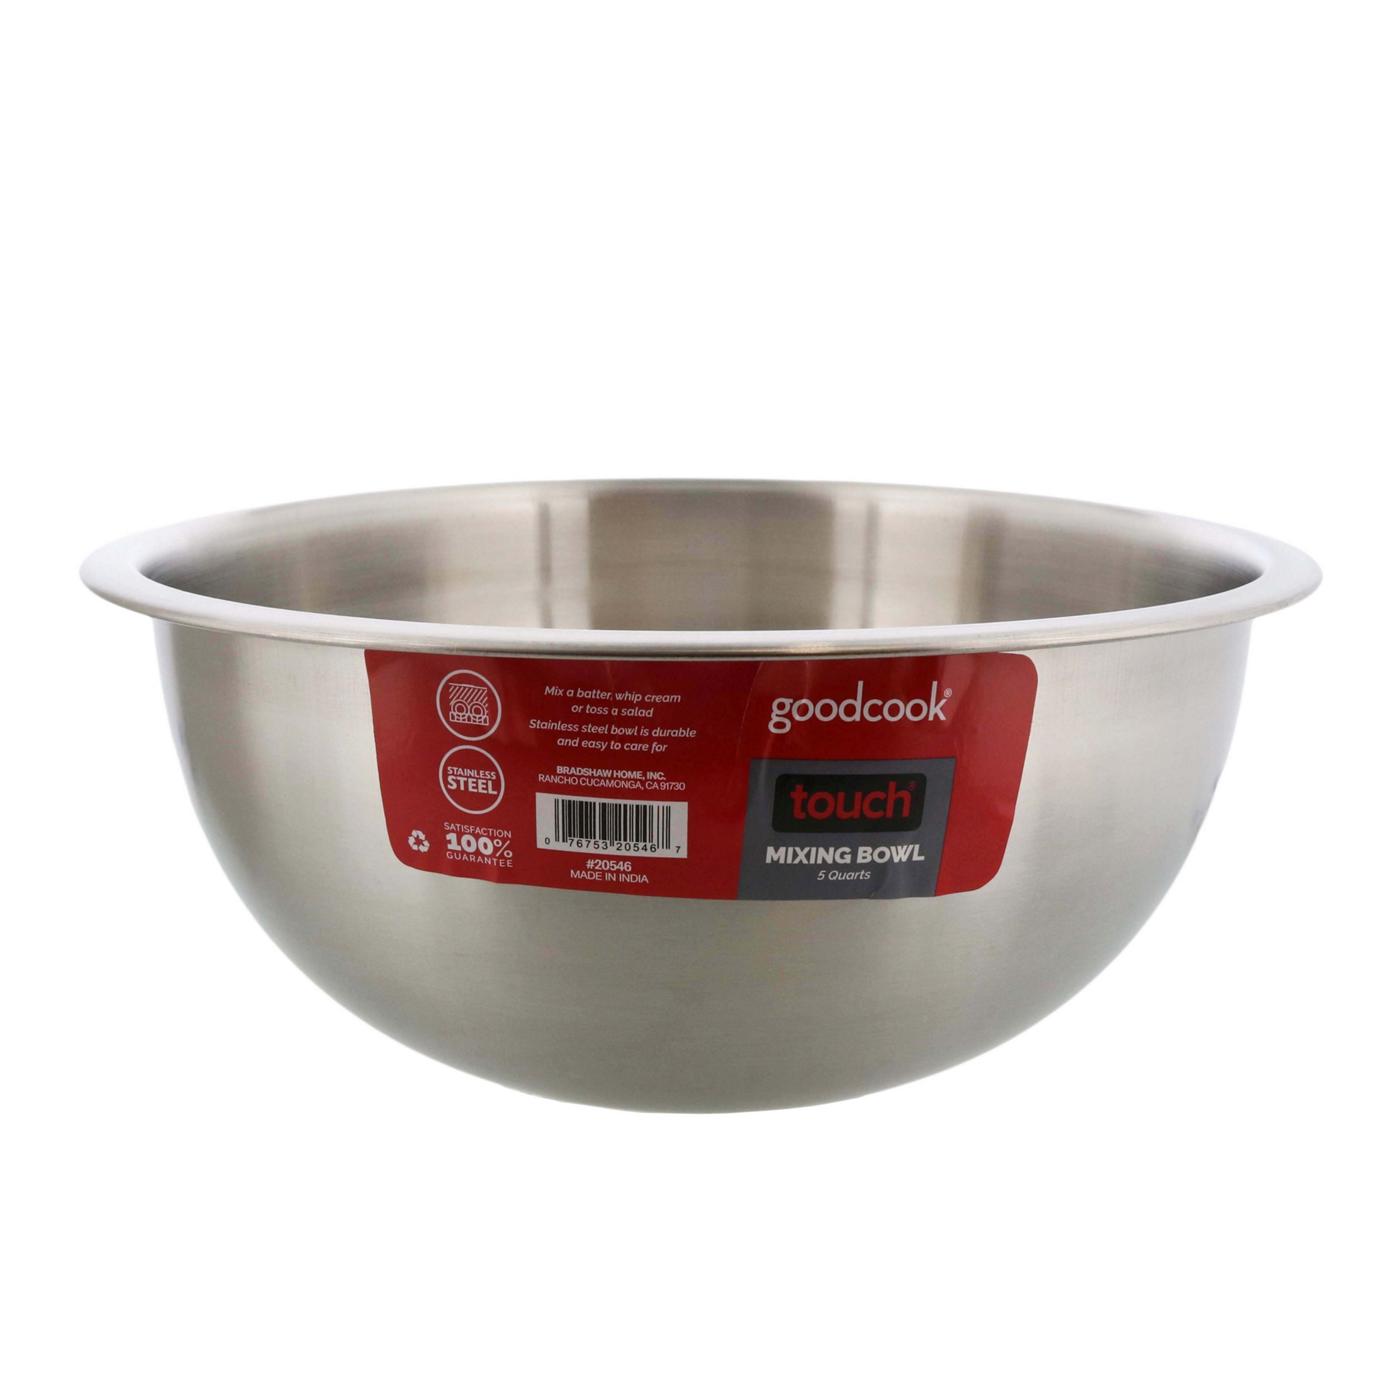 GoodCook Touch Stainless Steel Mixing Bowl; image 1 of 4